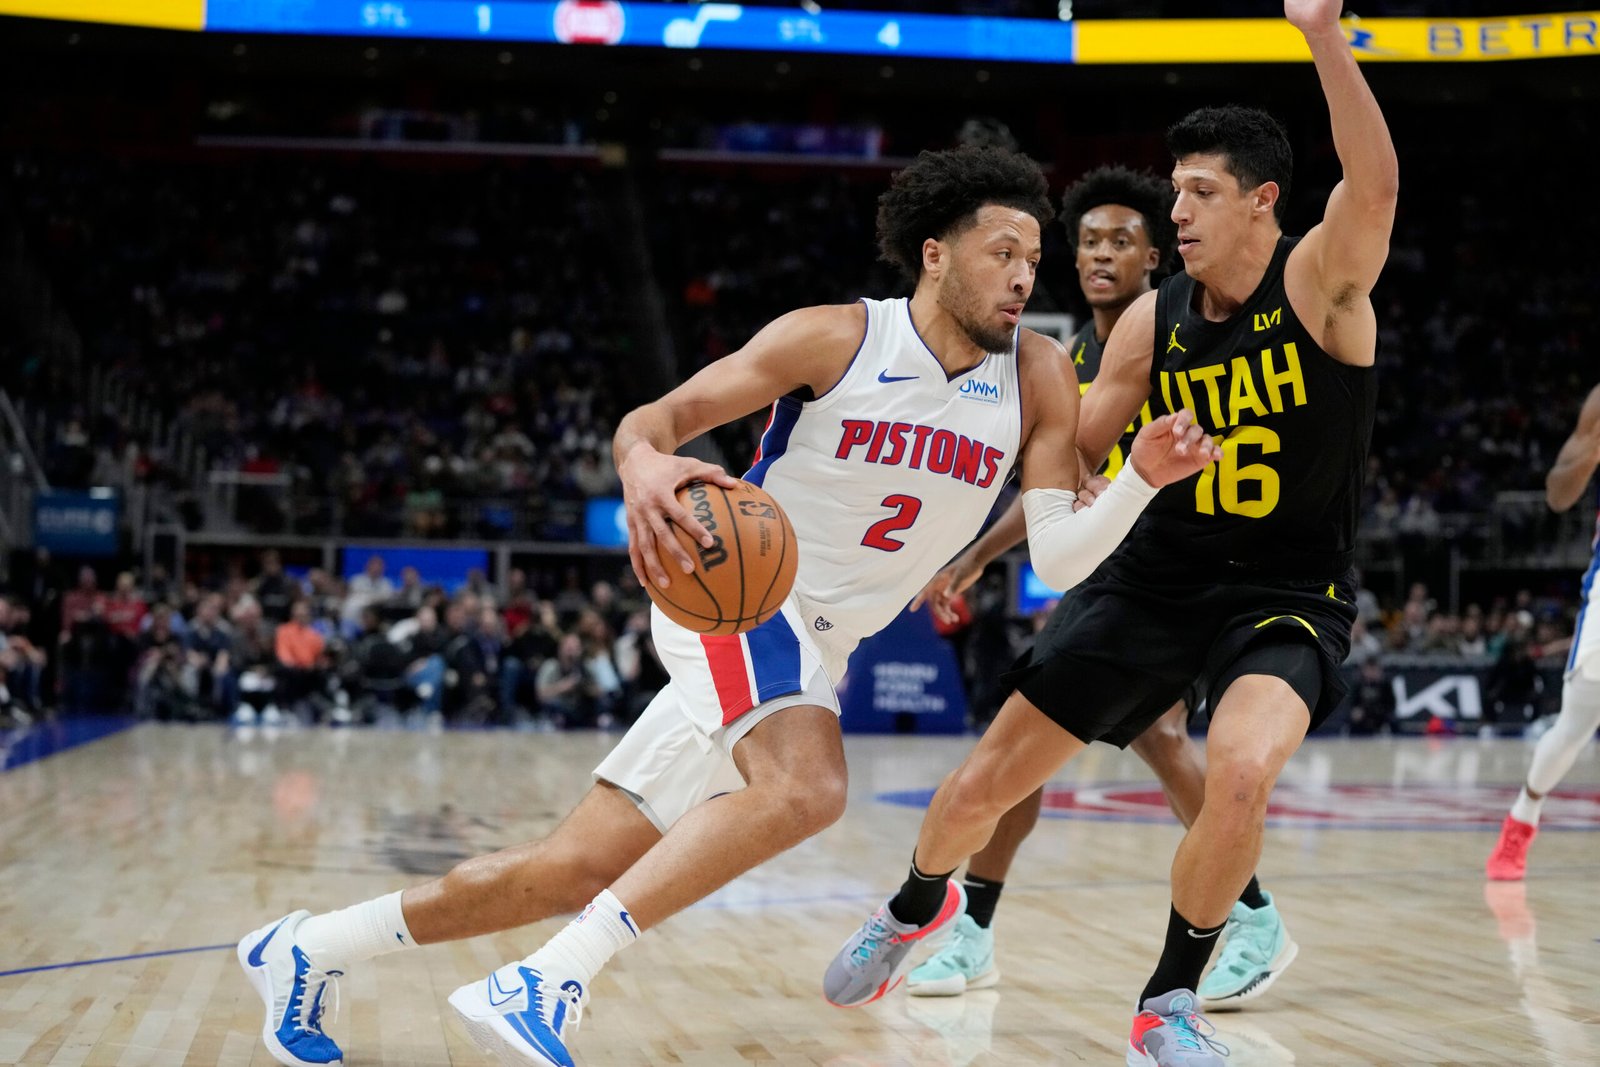 Pistons drop 25th straight, move within loss of tying NBA record